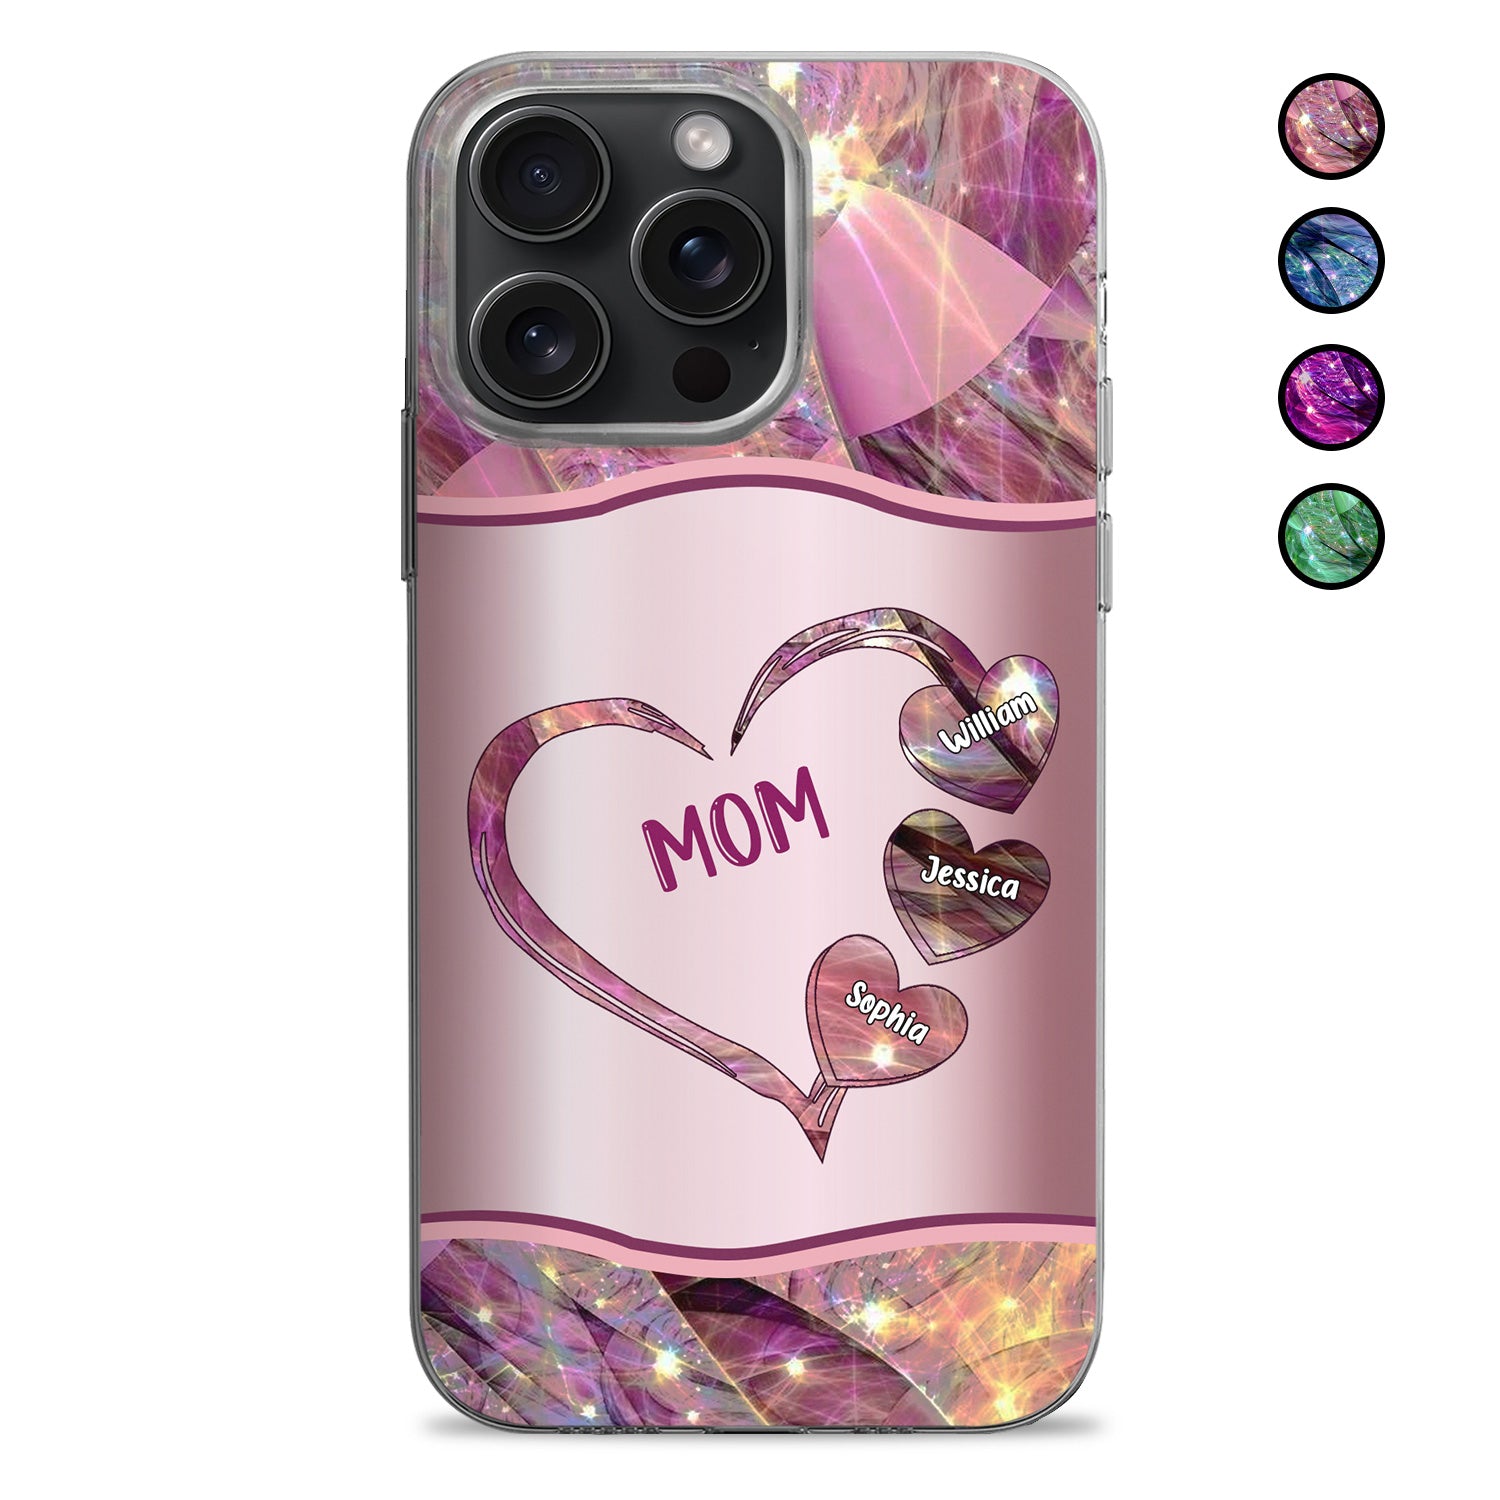 Mom Grandma Loads Of Sweet Heart Kids - Gift For Mother, Grandmother - Metal Effect Printed, Personalized Clear Phone Case